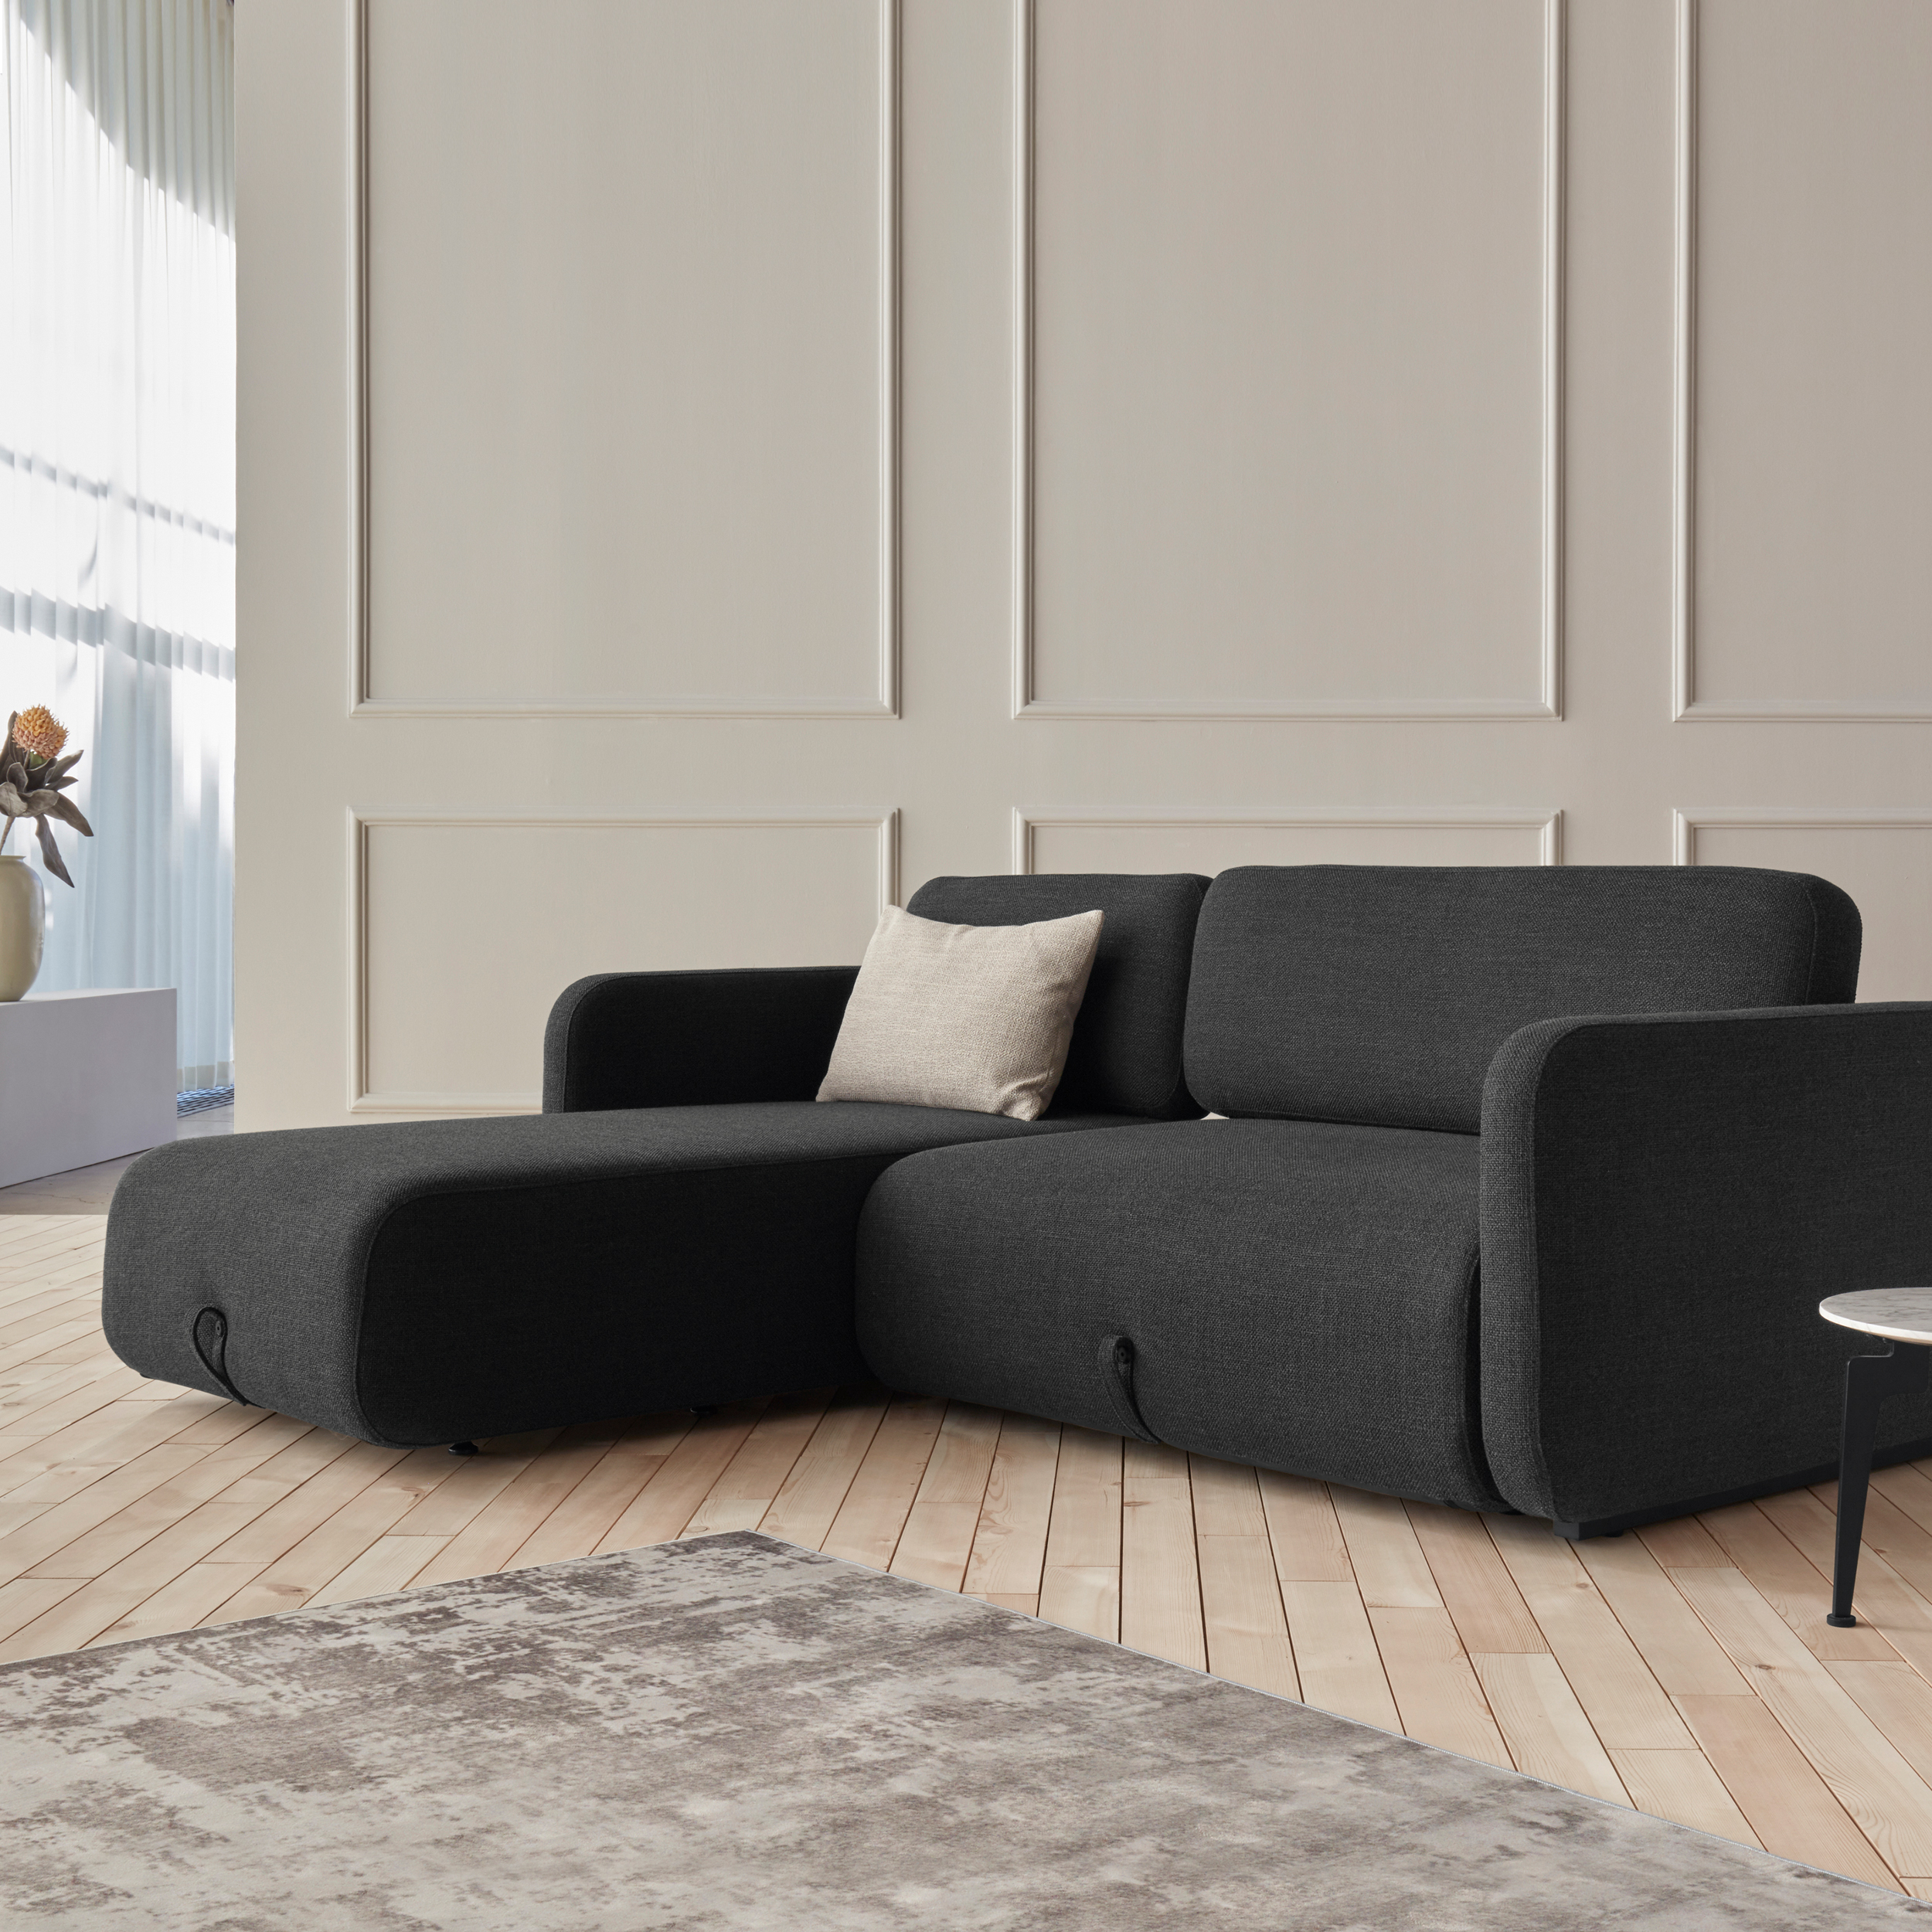 Innovation Living Vogan Louger Sofa Bed, Can You Sleep On A Sofa Bed Permanently